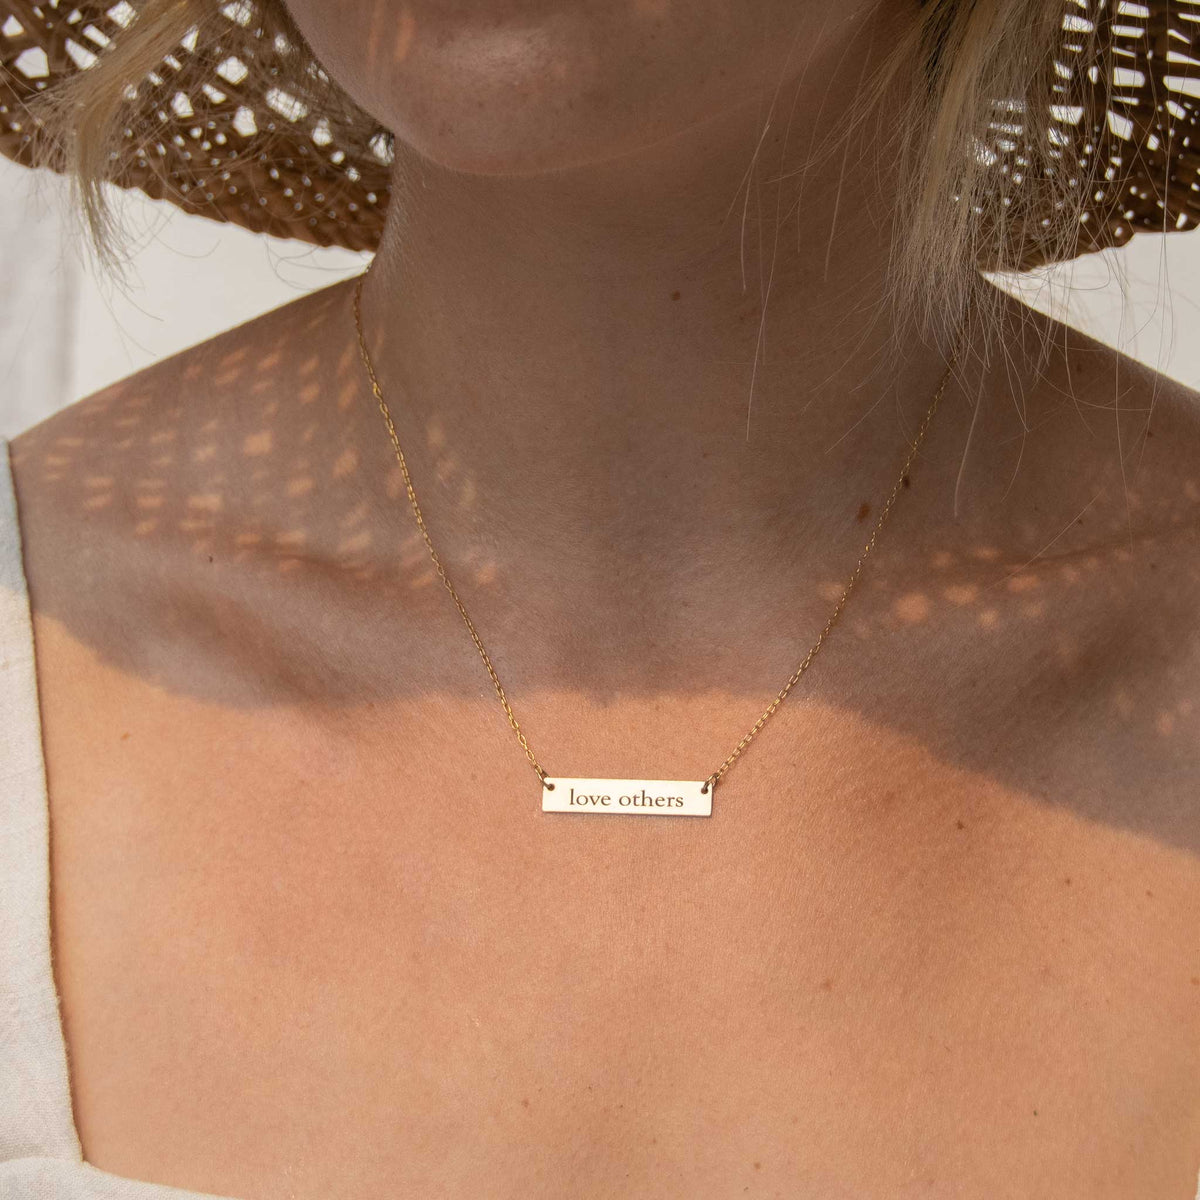 a woman wearing the 1.25 bar necklace with love other engraved with shadows from her woven hat casting geometric shadows onto her shoulders. 